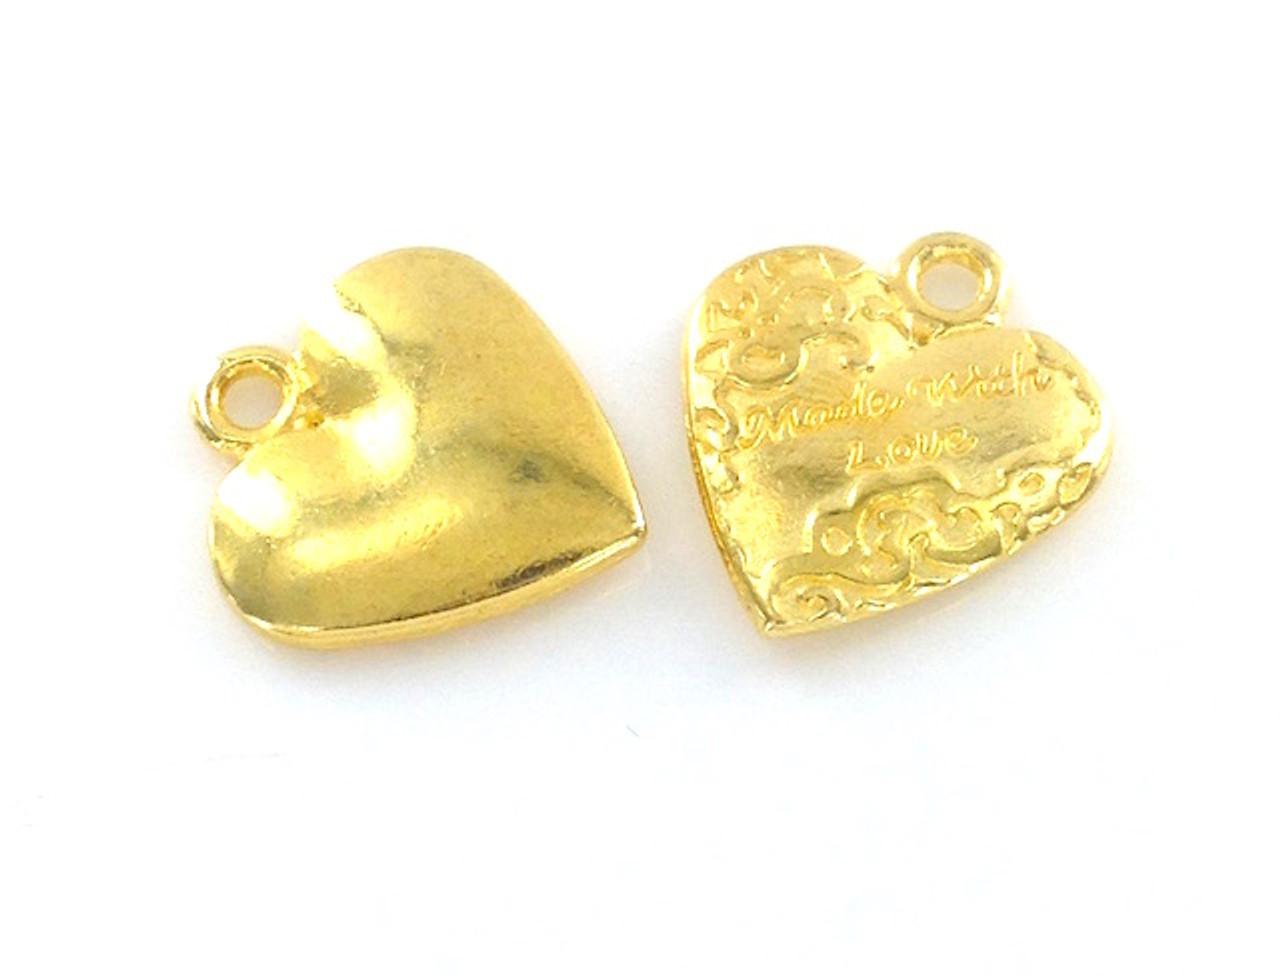 Wholesale Yellow Gold Filled Charms 